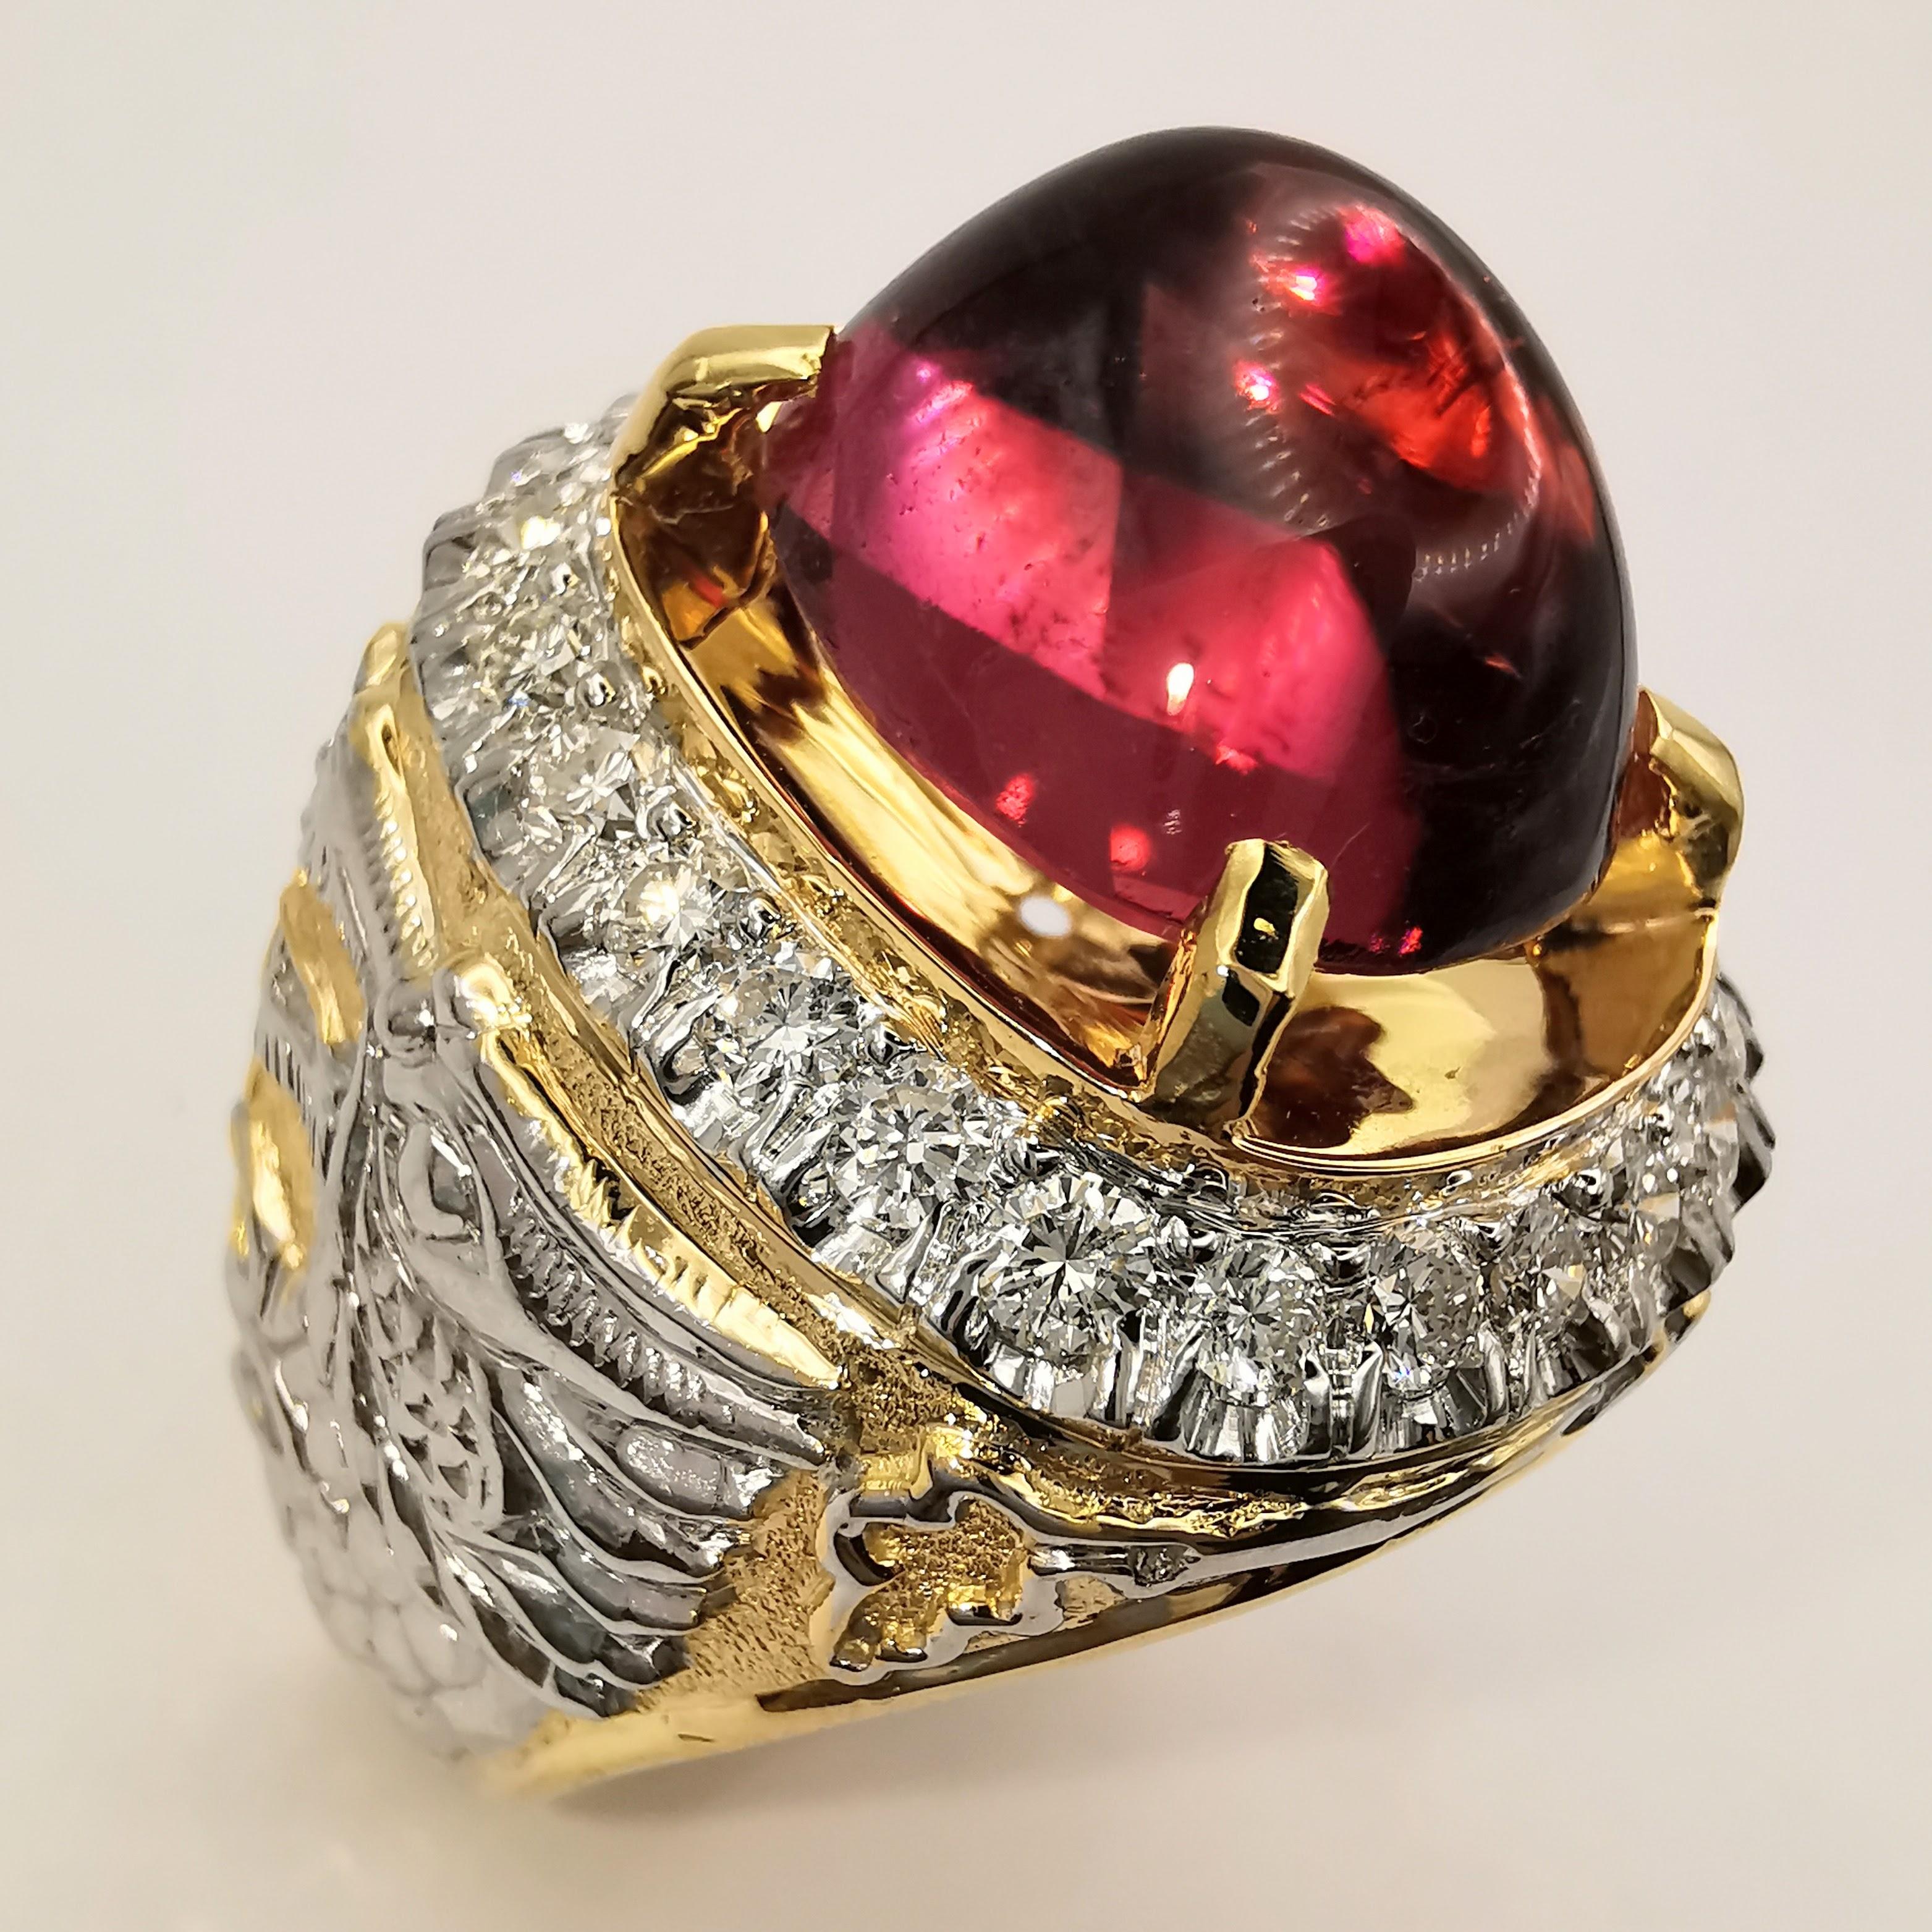 Vintage Dragon 10.2ct Cabochon Pink Tourmaline Diamond Men's Ring in 18K Gold In New Condition For Sale In Wan Chai District, HK